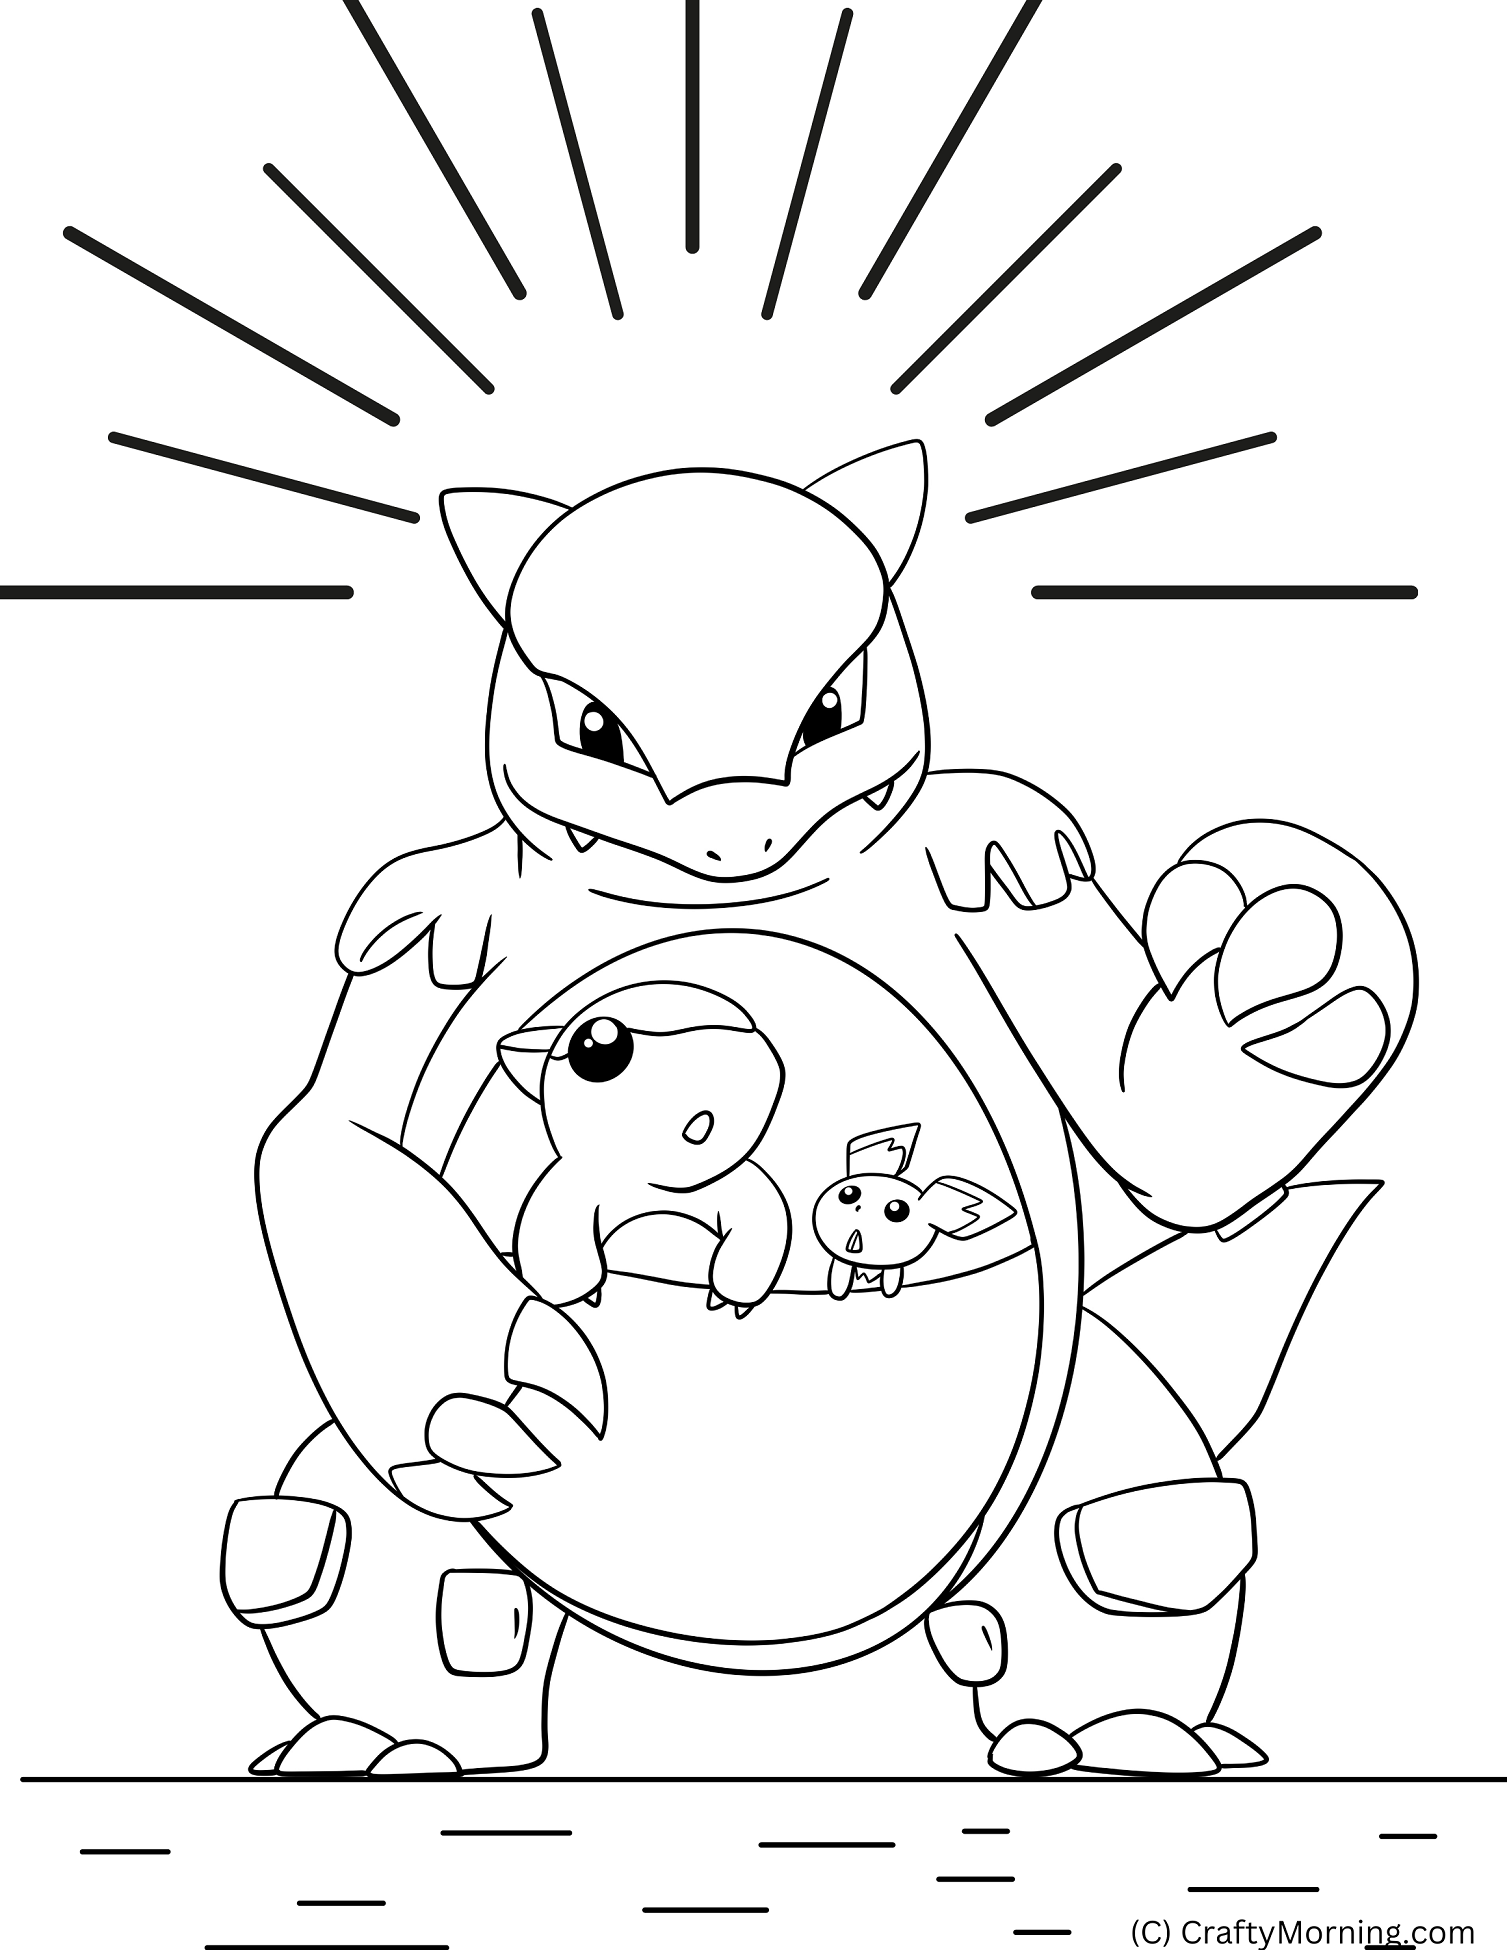 https://cdn.craftymorning.com/wp-content/uploads/2022/10/free-pokemon-coloring-page-4.png